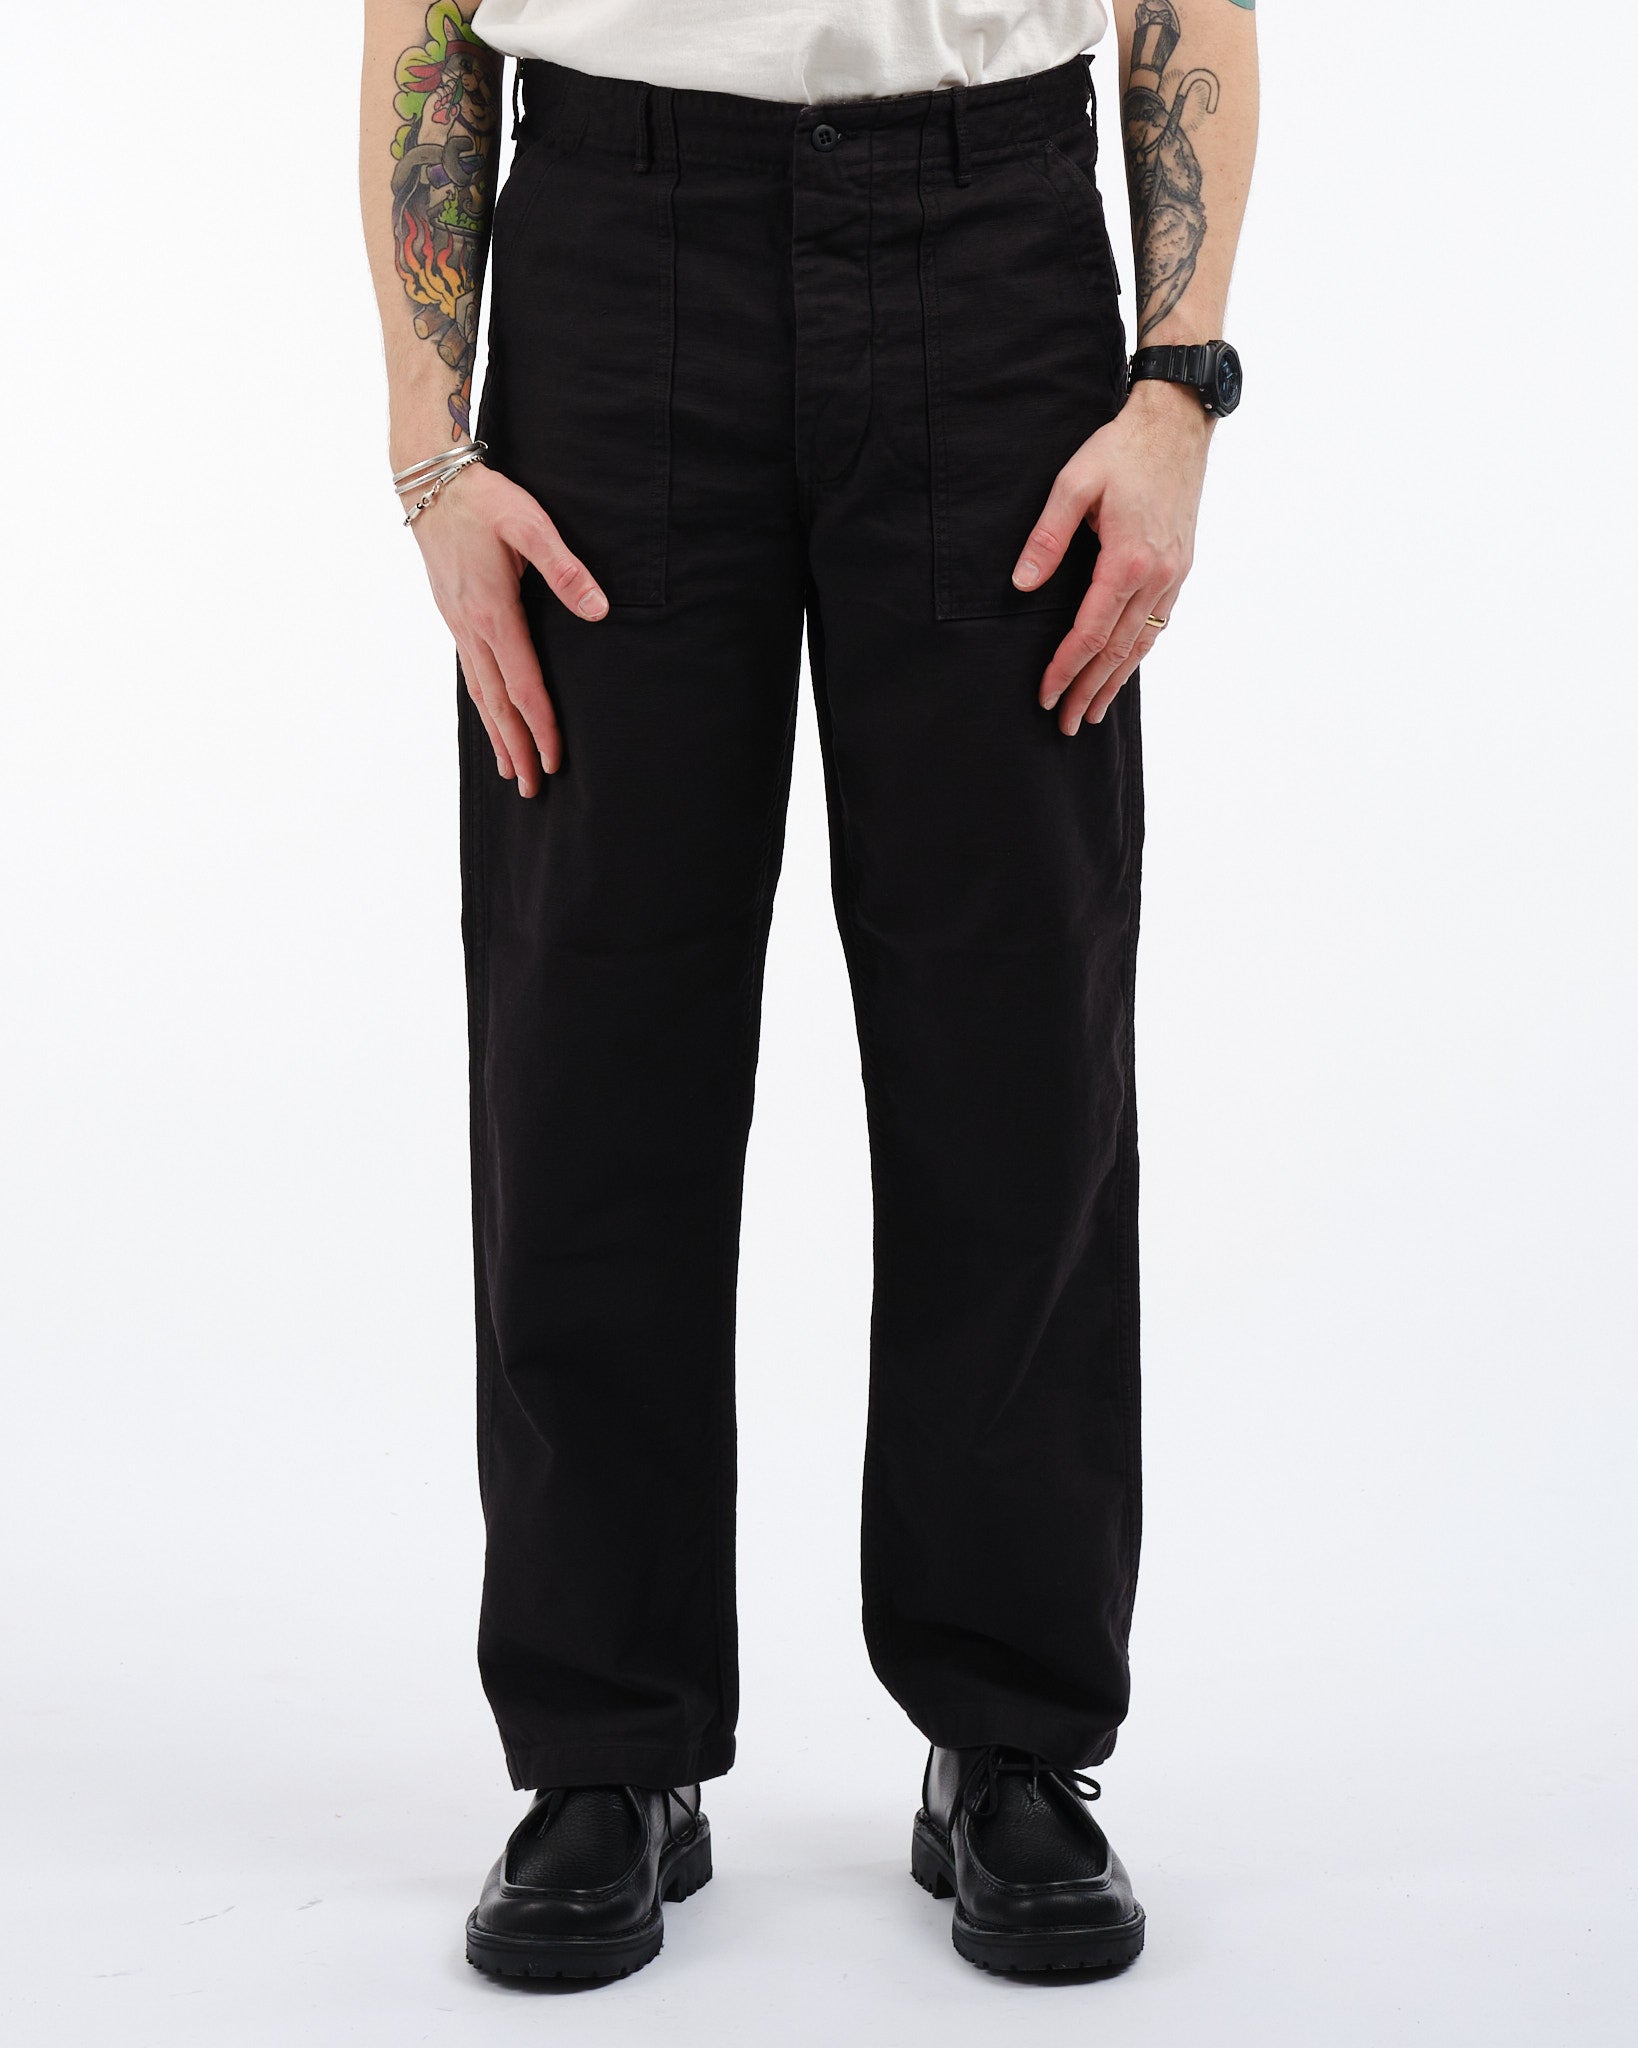 SGS Cargo Pants Black Military Style - Army Supply Store Military